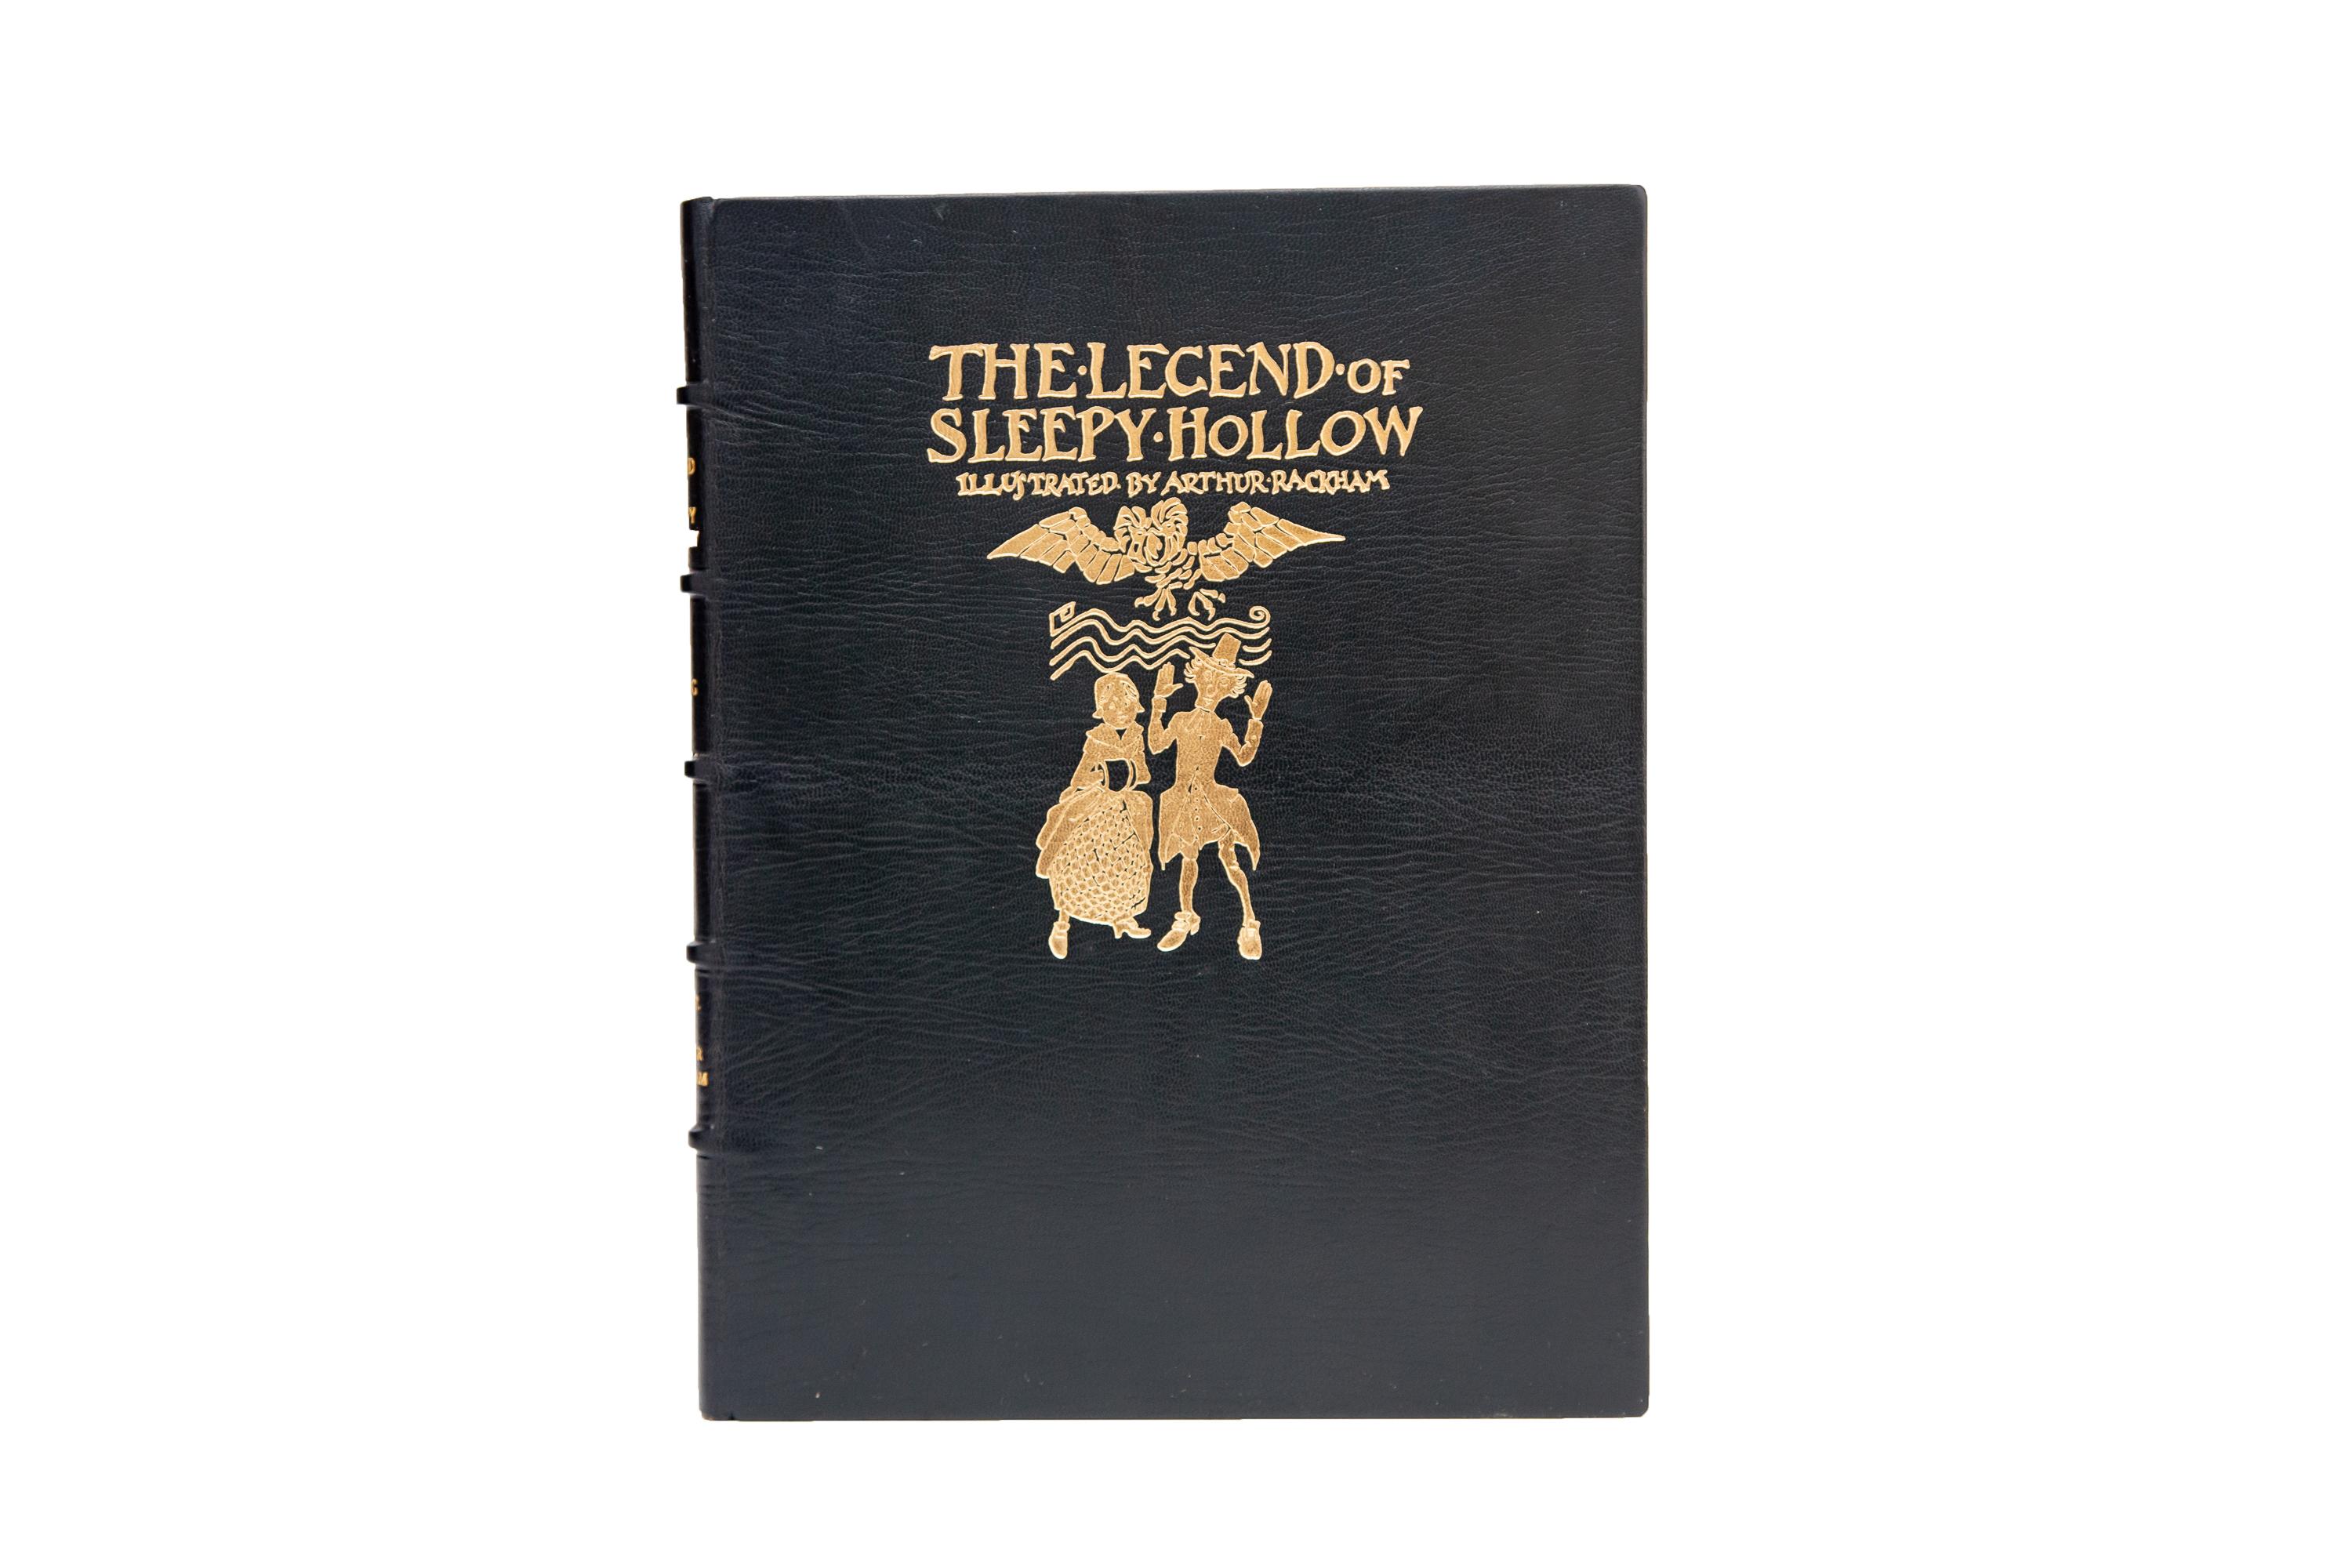 1 Volume. Irving Washington, The Legend of Sleepy Hollow. Limited Edition. Bound in full green morocco with the cover displaying the title and character depictions in gilt. the spines display raised bands and gilt-tooled label lettering. The top